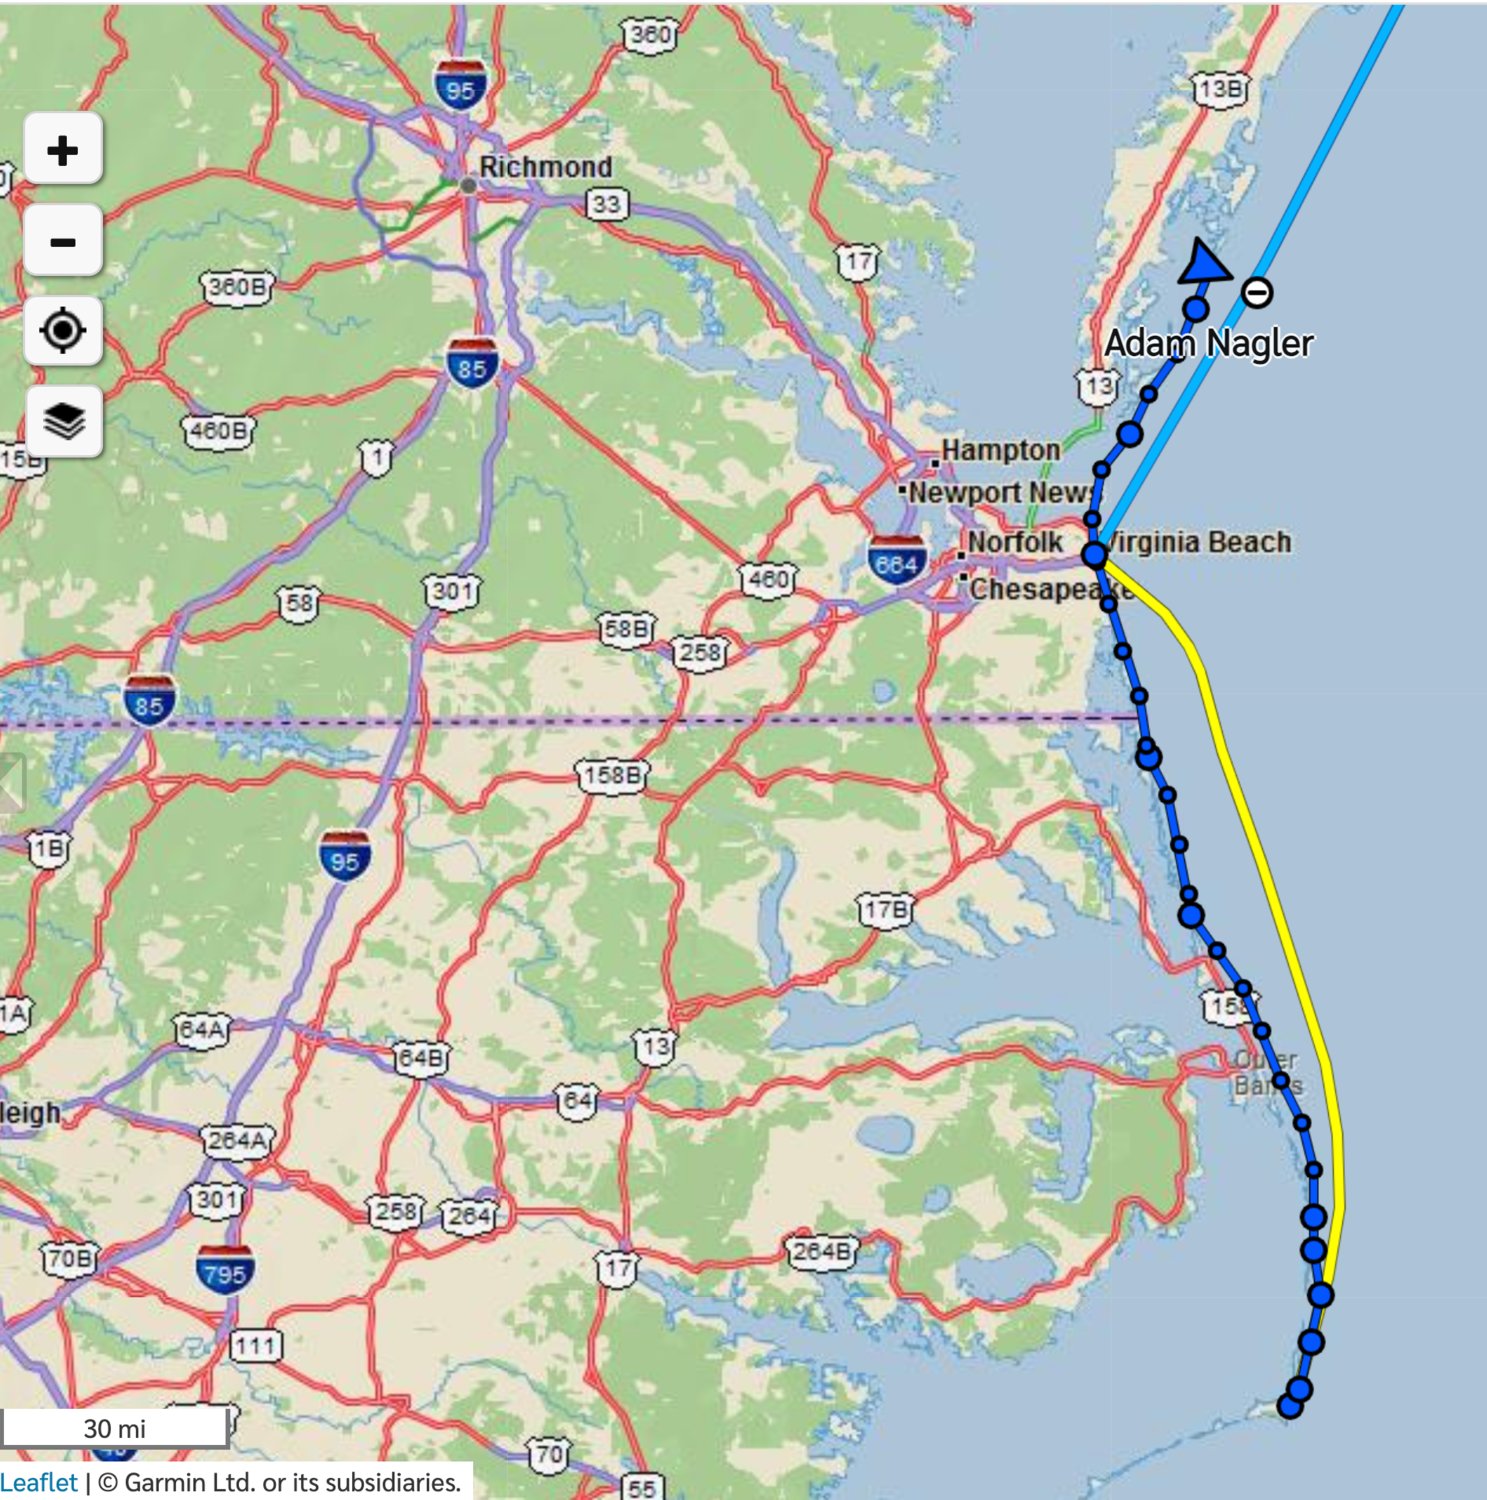 The blue-dotted line represents the path Adam Nagler has taken so far.